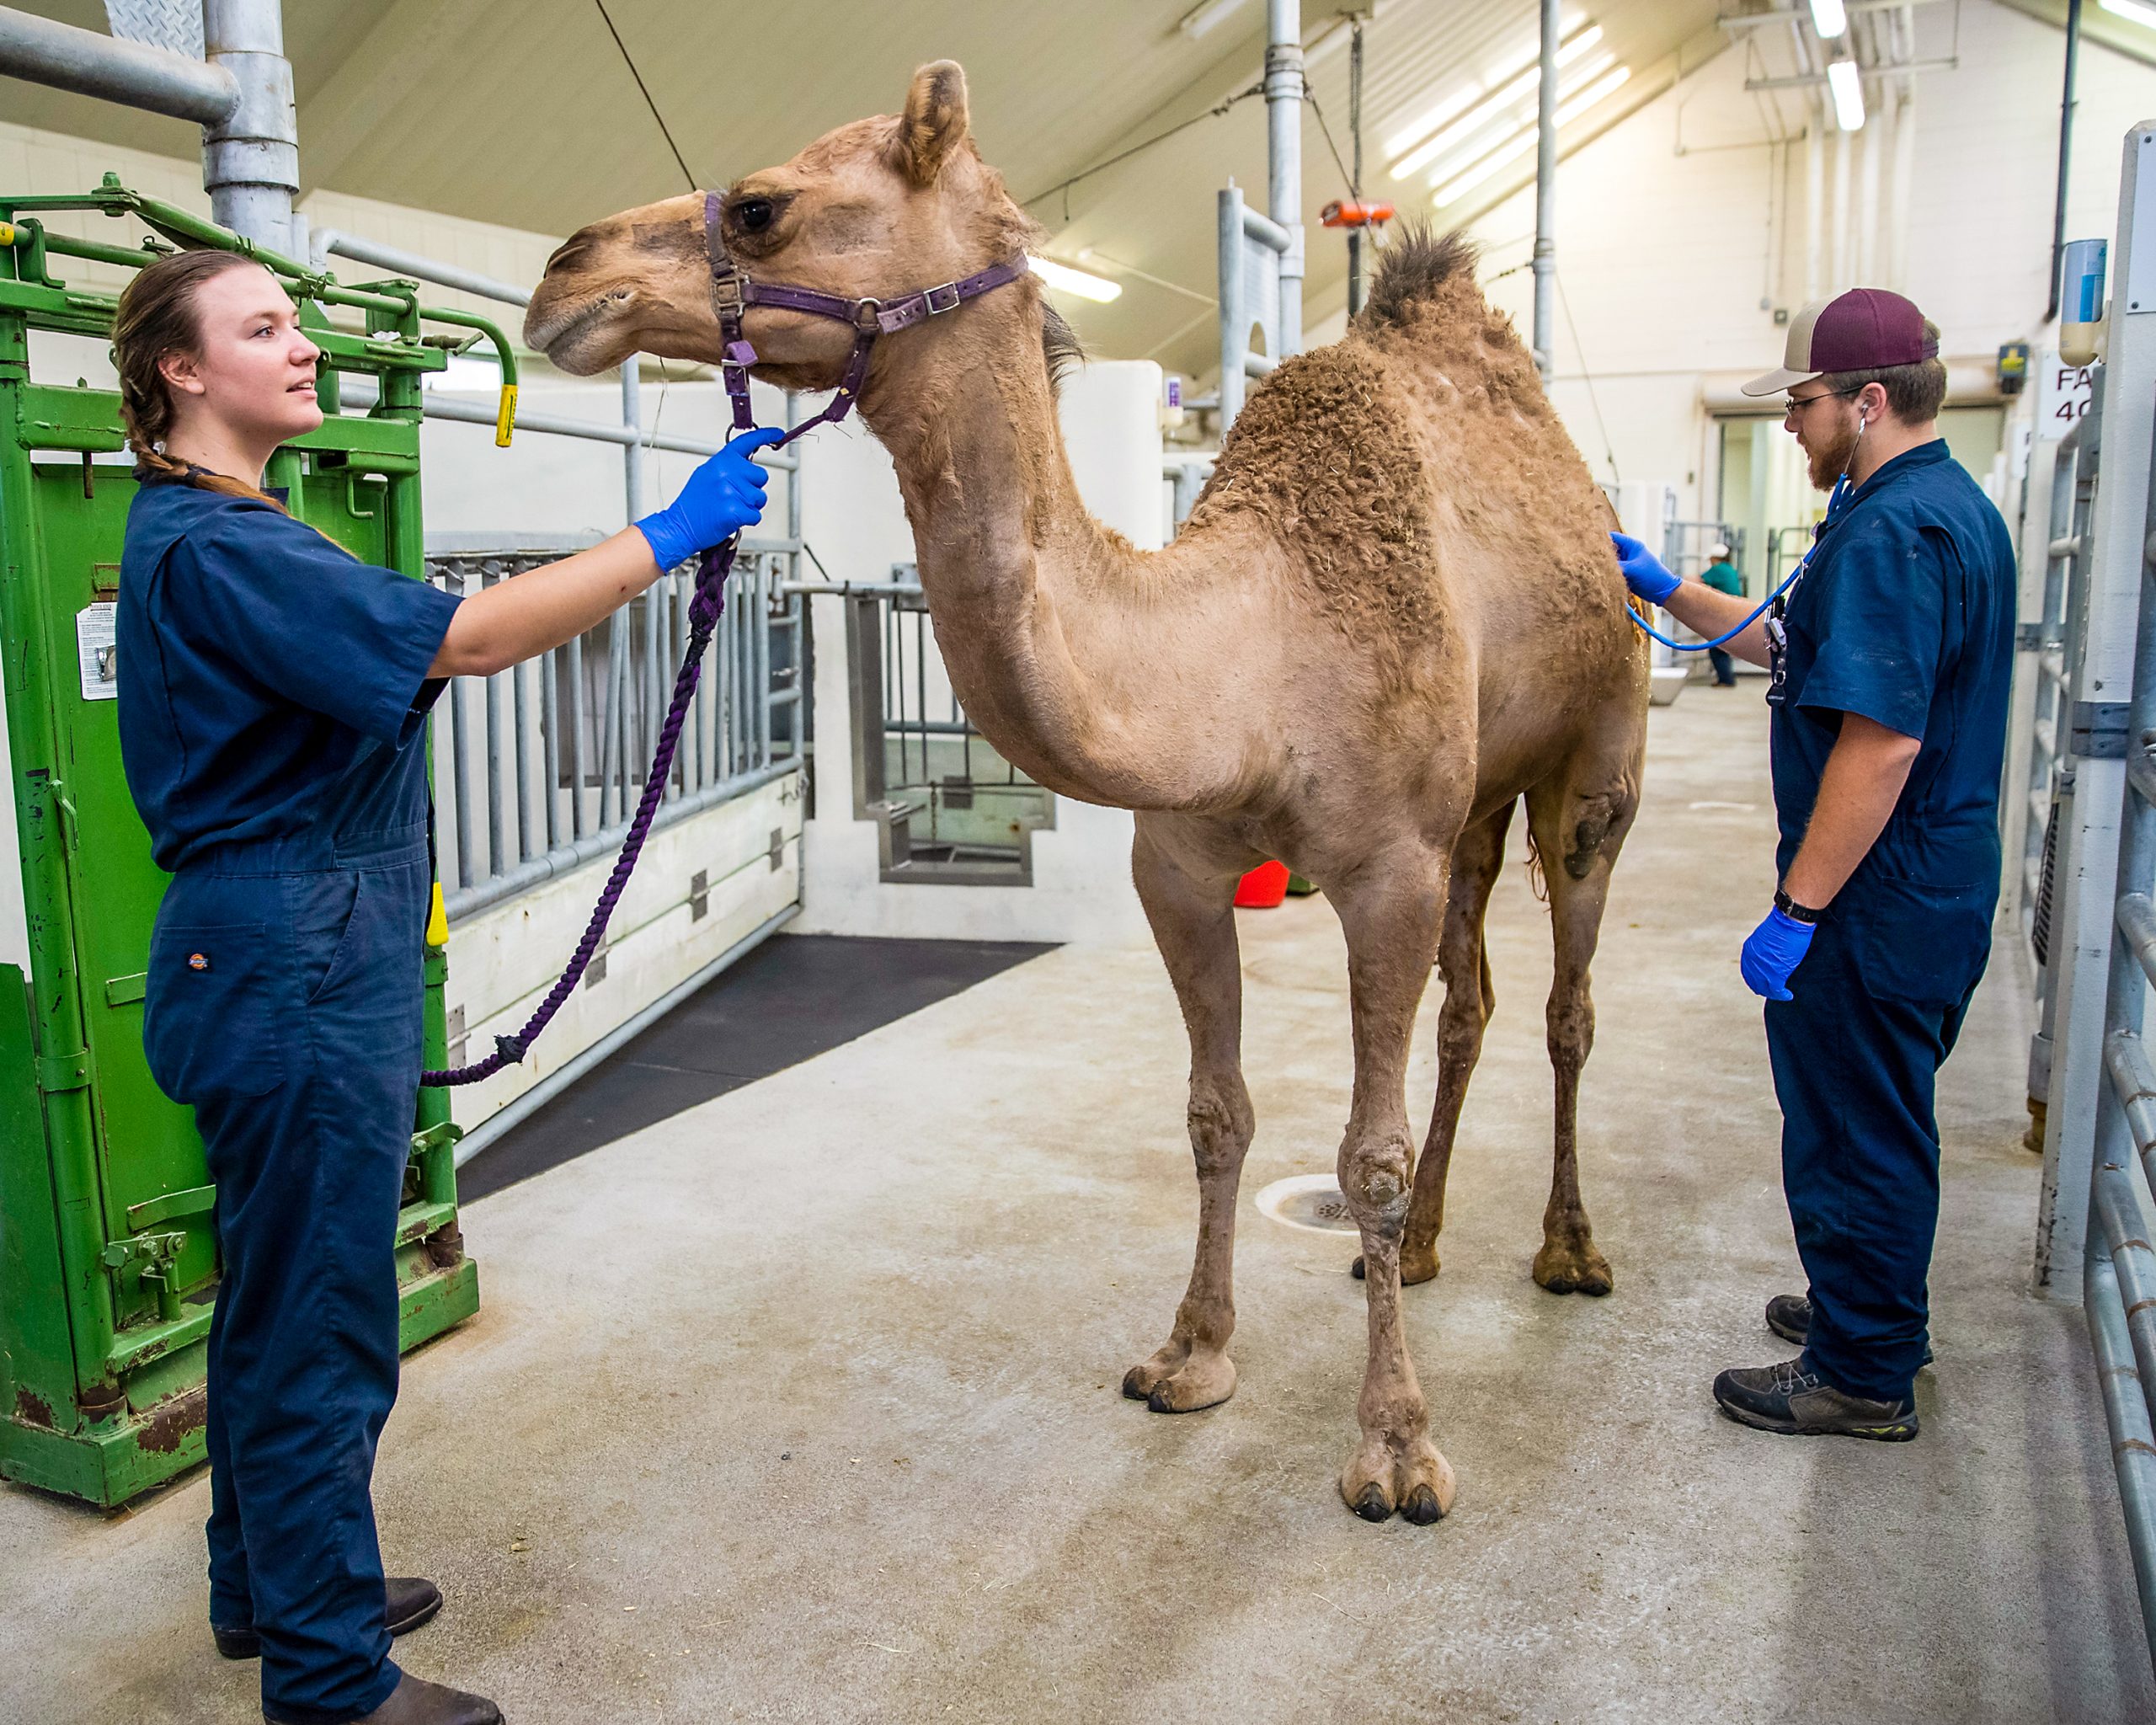 Camel+Recovering+from+hip+surgery+after+operation+from+Texas+A%26M+veterinarians